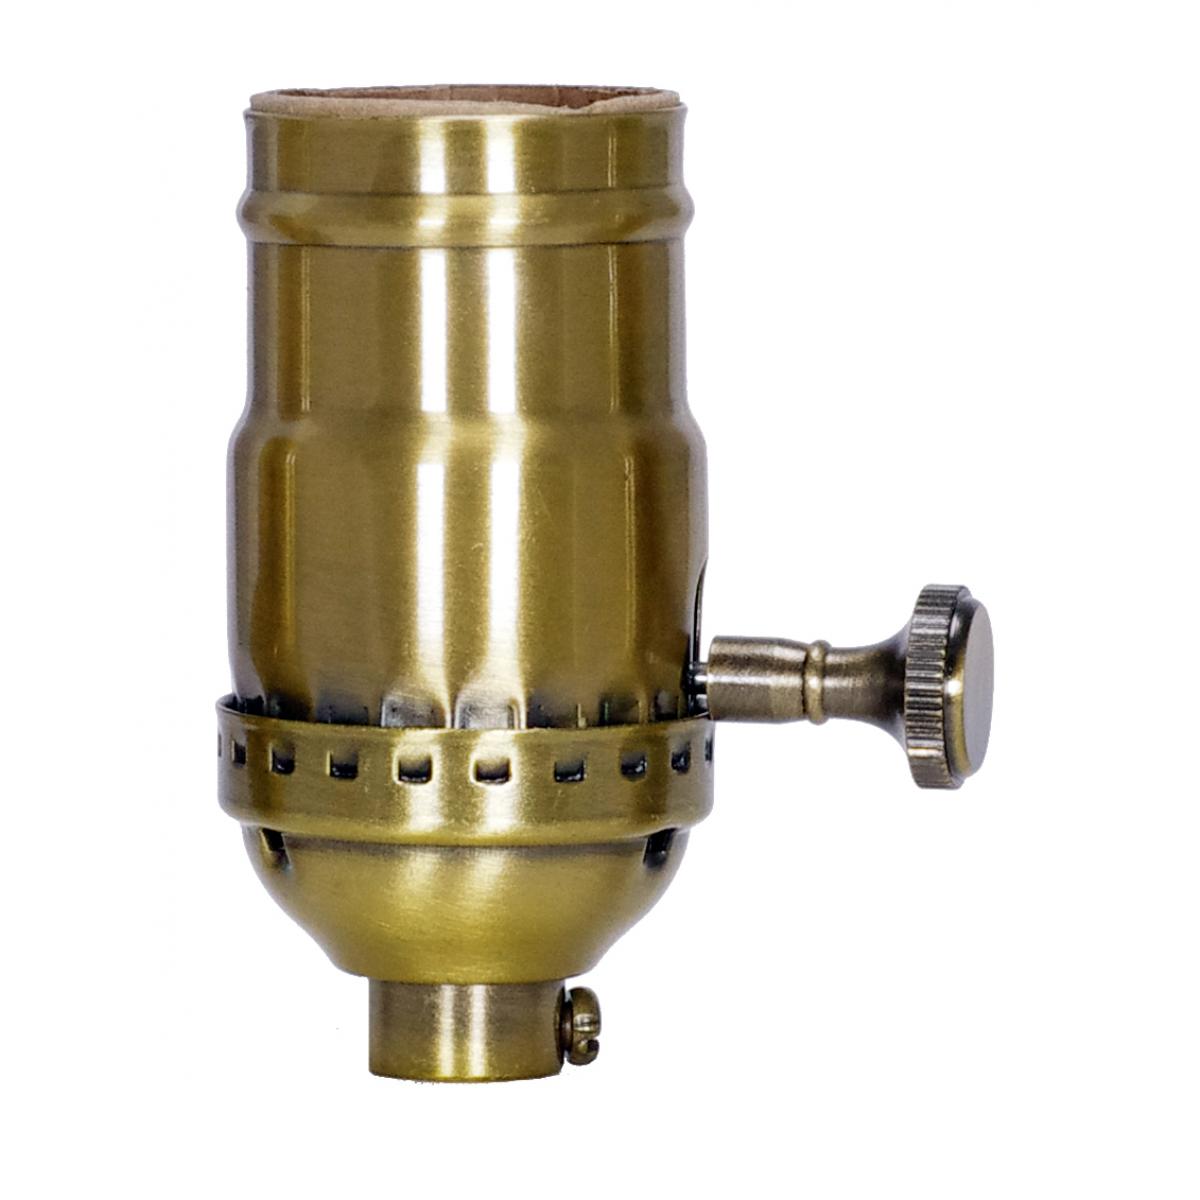 Satco 80-2358 On-Off Turn Knob Socket With Removable Knob 1/8 IPS 3 Piece Stamped Solid Brass Antique Brass Finish 250W 250V